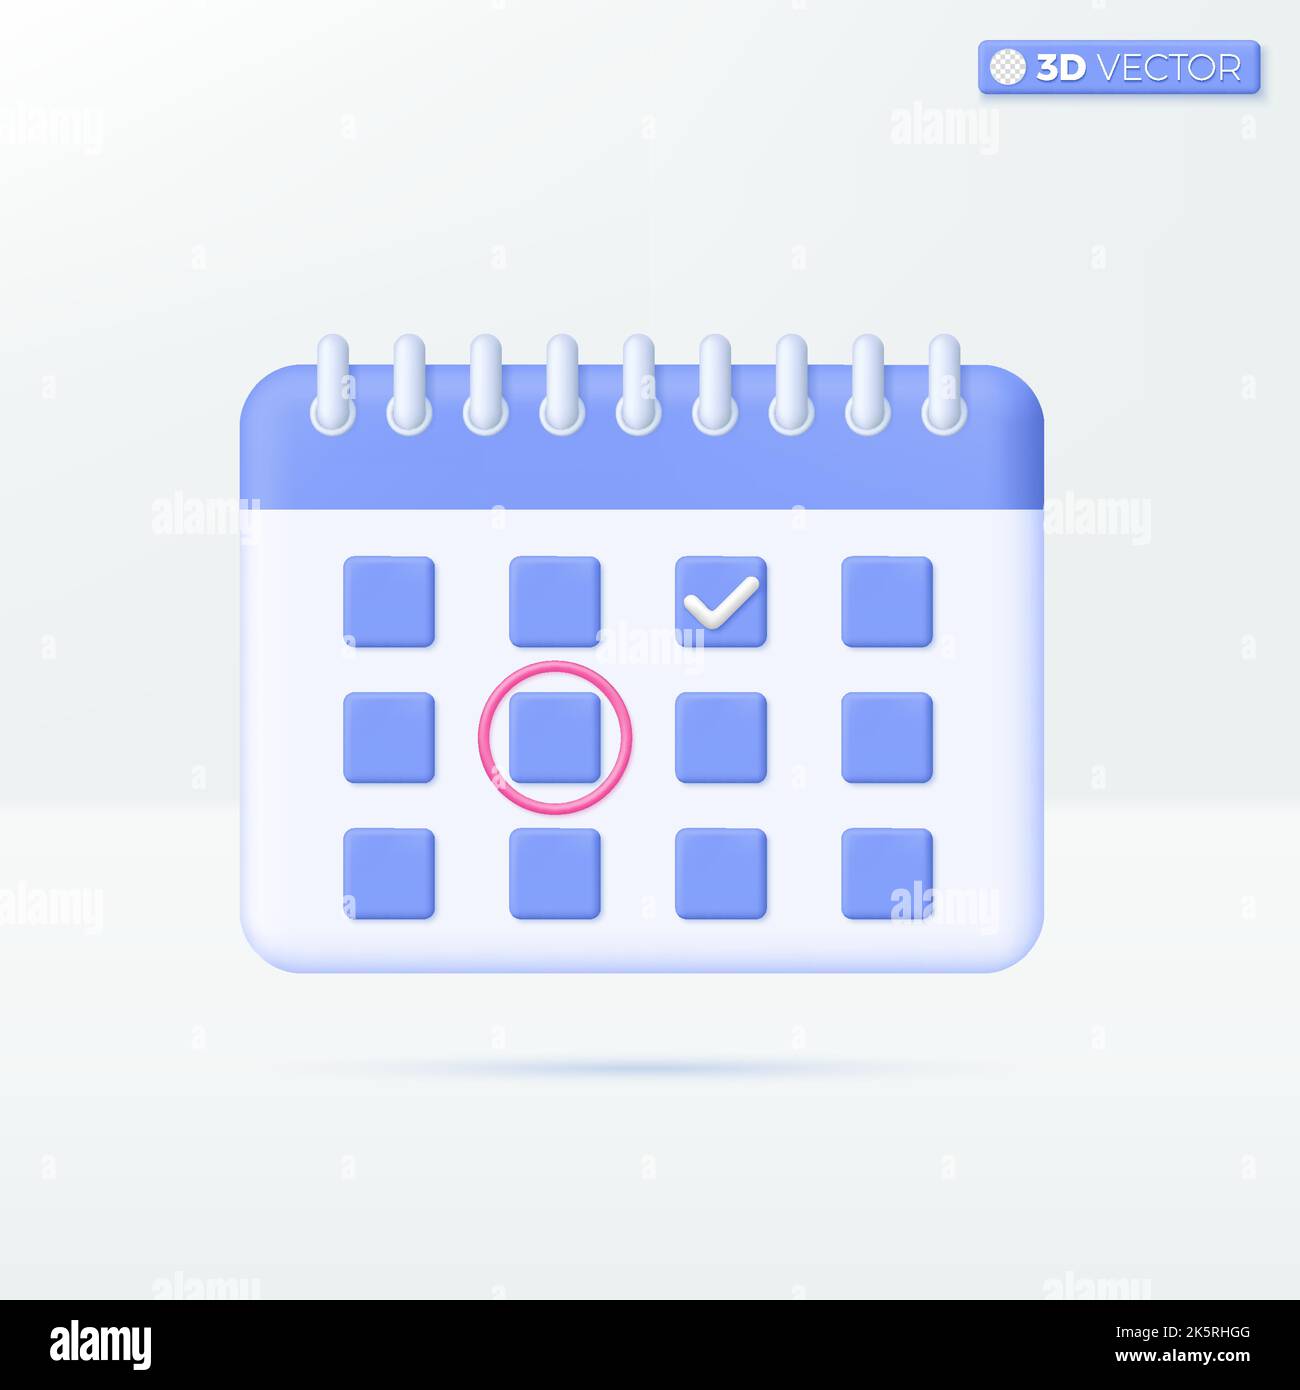 Calendar appointment icon symbols. Schedule assignment, business event planning concept. 3D vector isolated illustration design. Cartoon pastel Minima Stock Vector